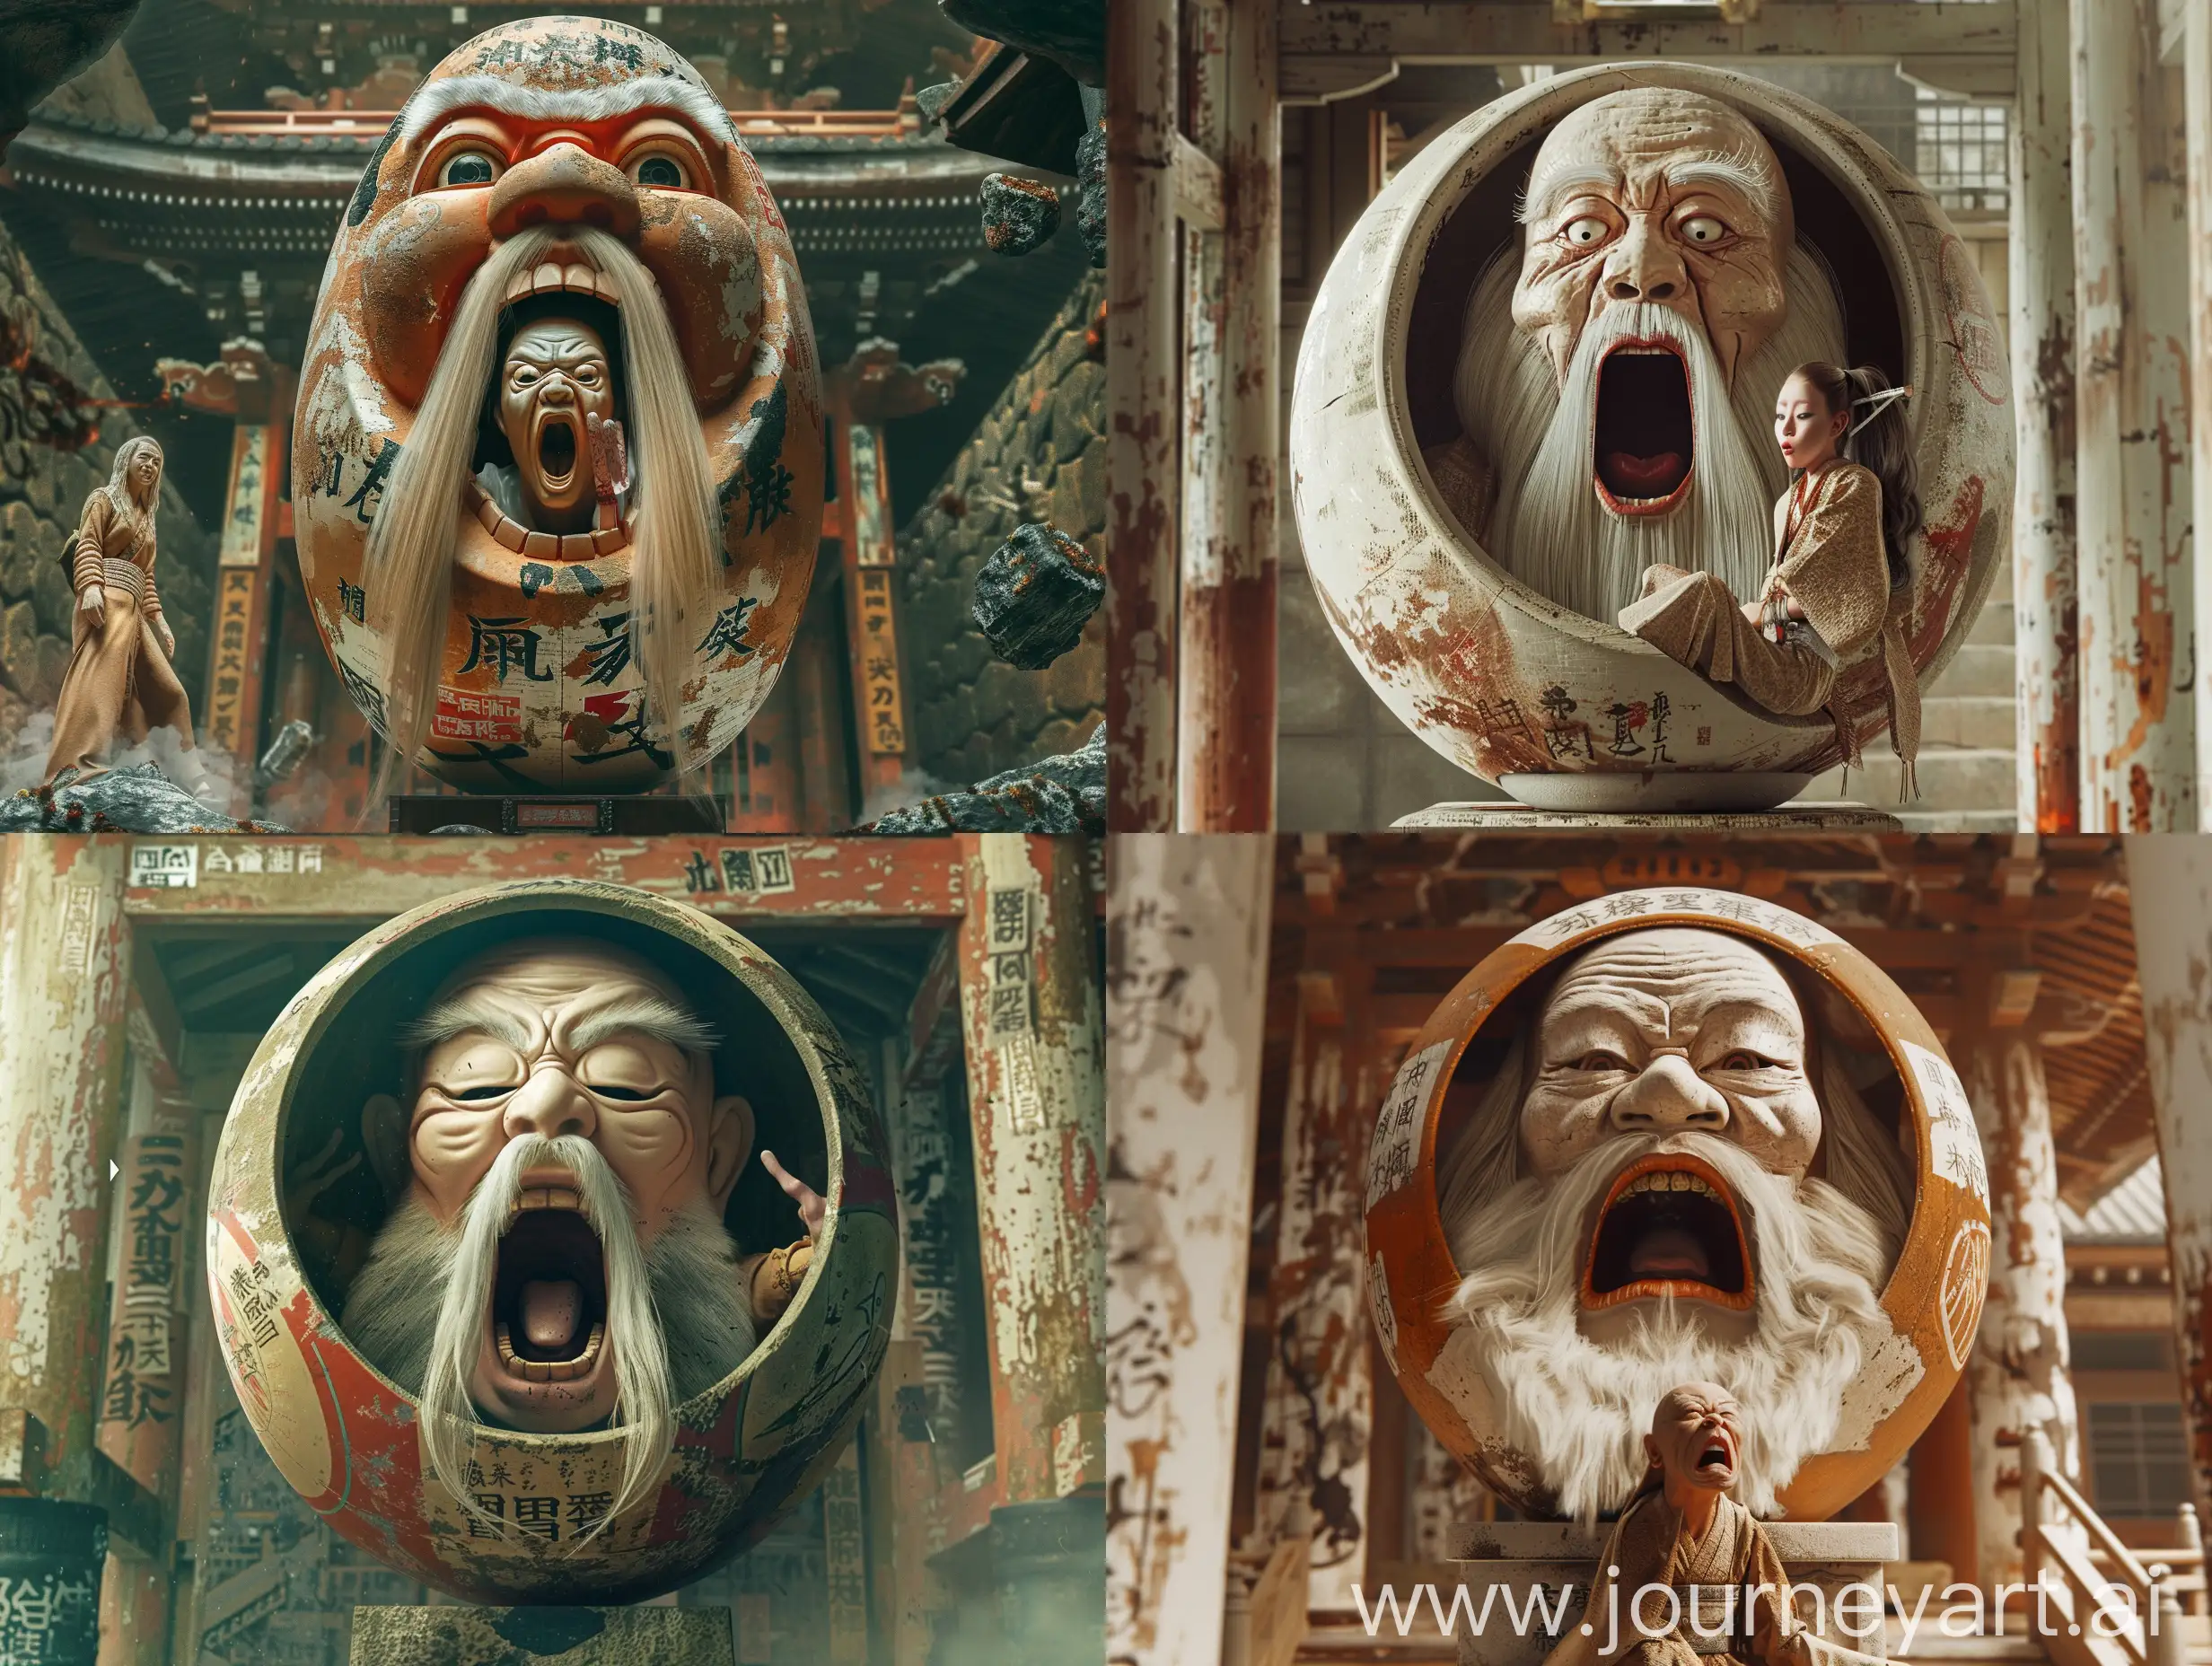 cinematic, realism, Depiction of a yokai ((( The giant Daruma has the body of an old monk, with his mouth wide open, and inside his mouth is a long-haired Japanese woman ))), sits on a japan shrine above the abyss, cinematic, realism, Using (((imagination))) to craft a photorealistic representation of an unusual fantasy dream, Abandoned ancient temple in Tokyo, Amazing, shocking, Mysterious, Contrasty, ivory colors, Memphis, The UHD camera captures every detail of this moment, highlighting the colors and textures. Render him in a photorealistic style, cinematic, capturing the fine details of him features and surroundings. Pay close attention to realistic skin tones, textures, and lighting conditions. Ensure the image is in high resolution, such as 8K, to showcase the intricate details and allo